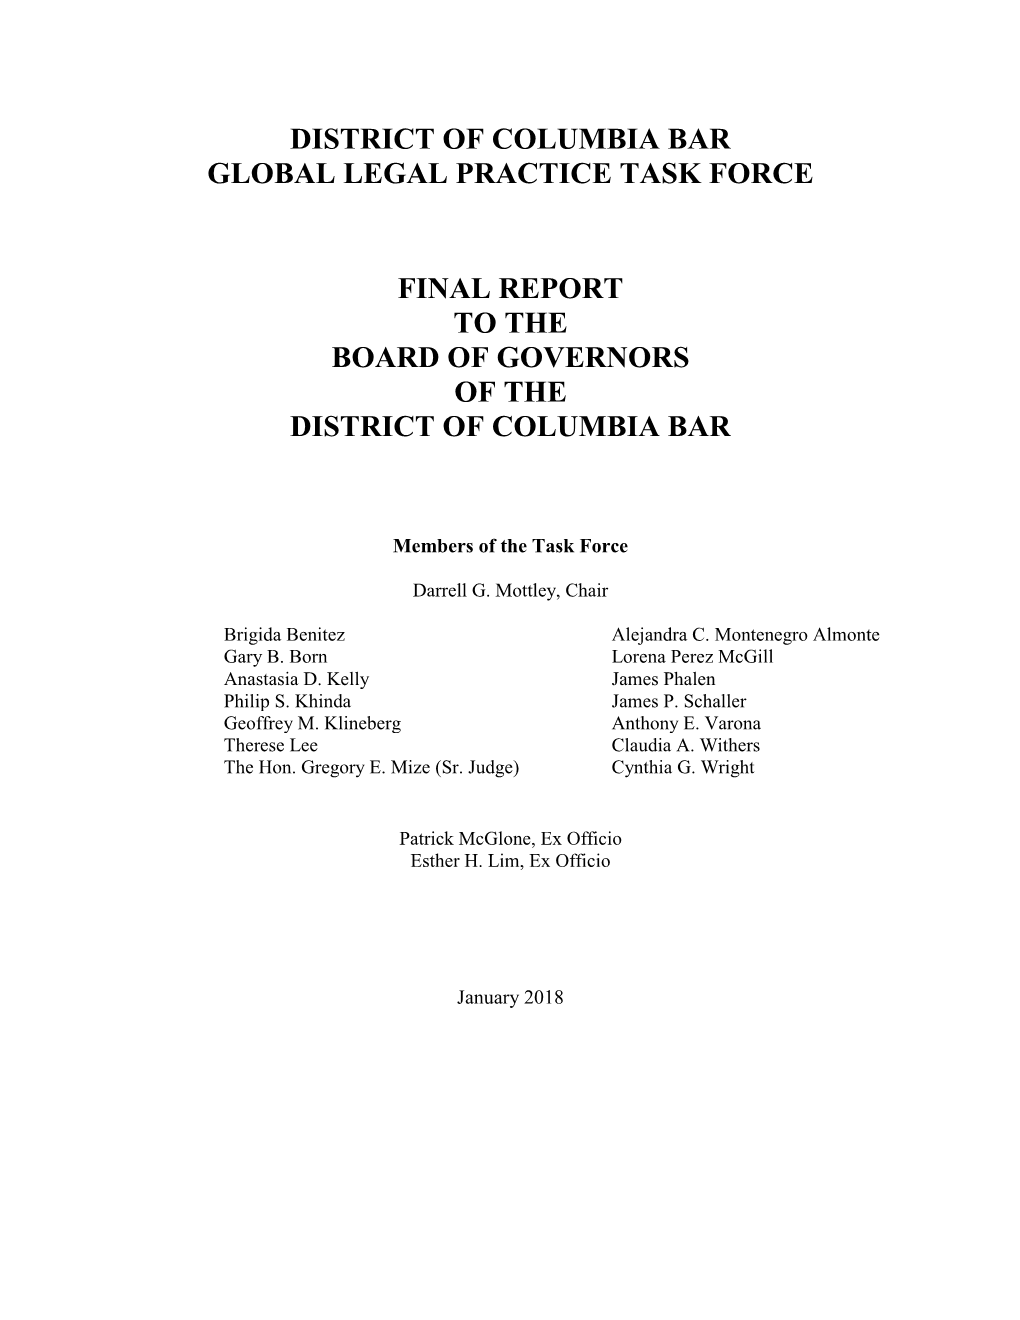 District of Columbia Bar Global Legal Practice Task Force Final Report to The